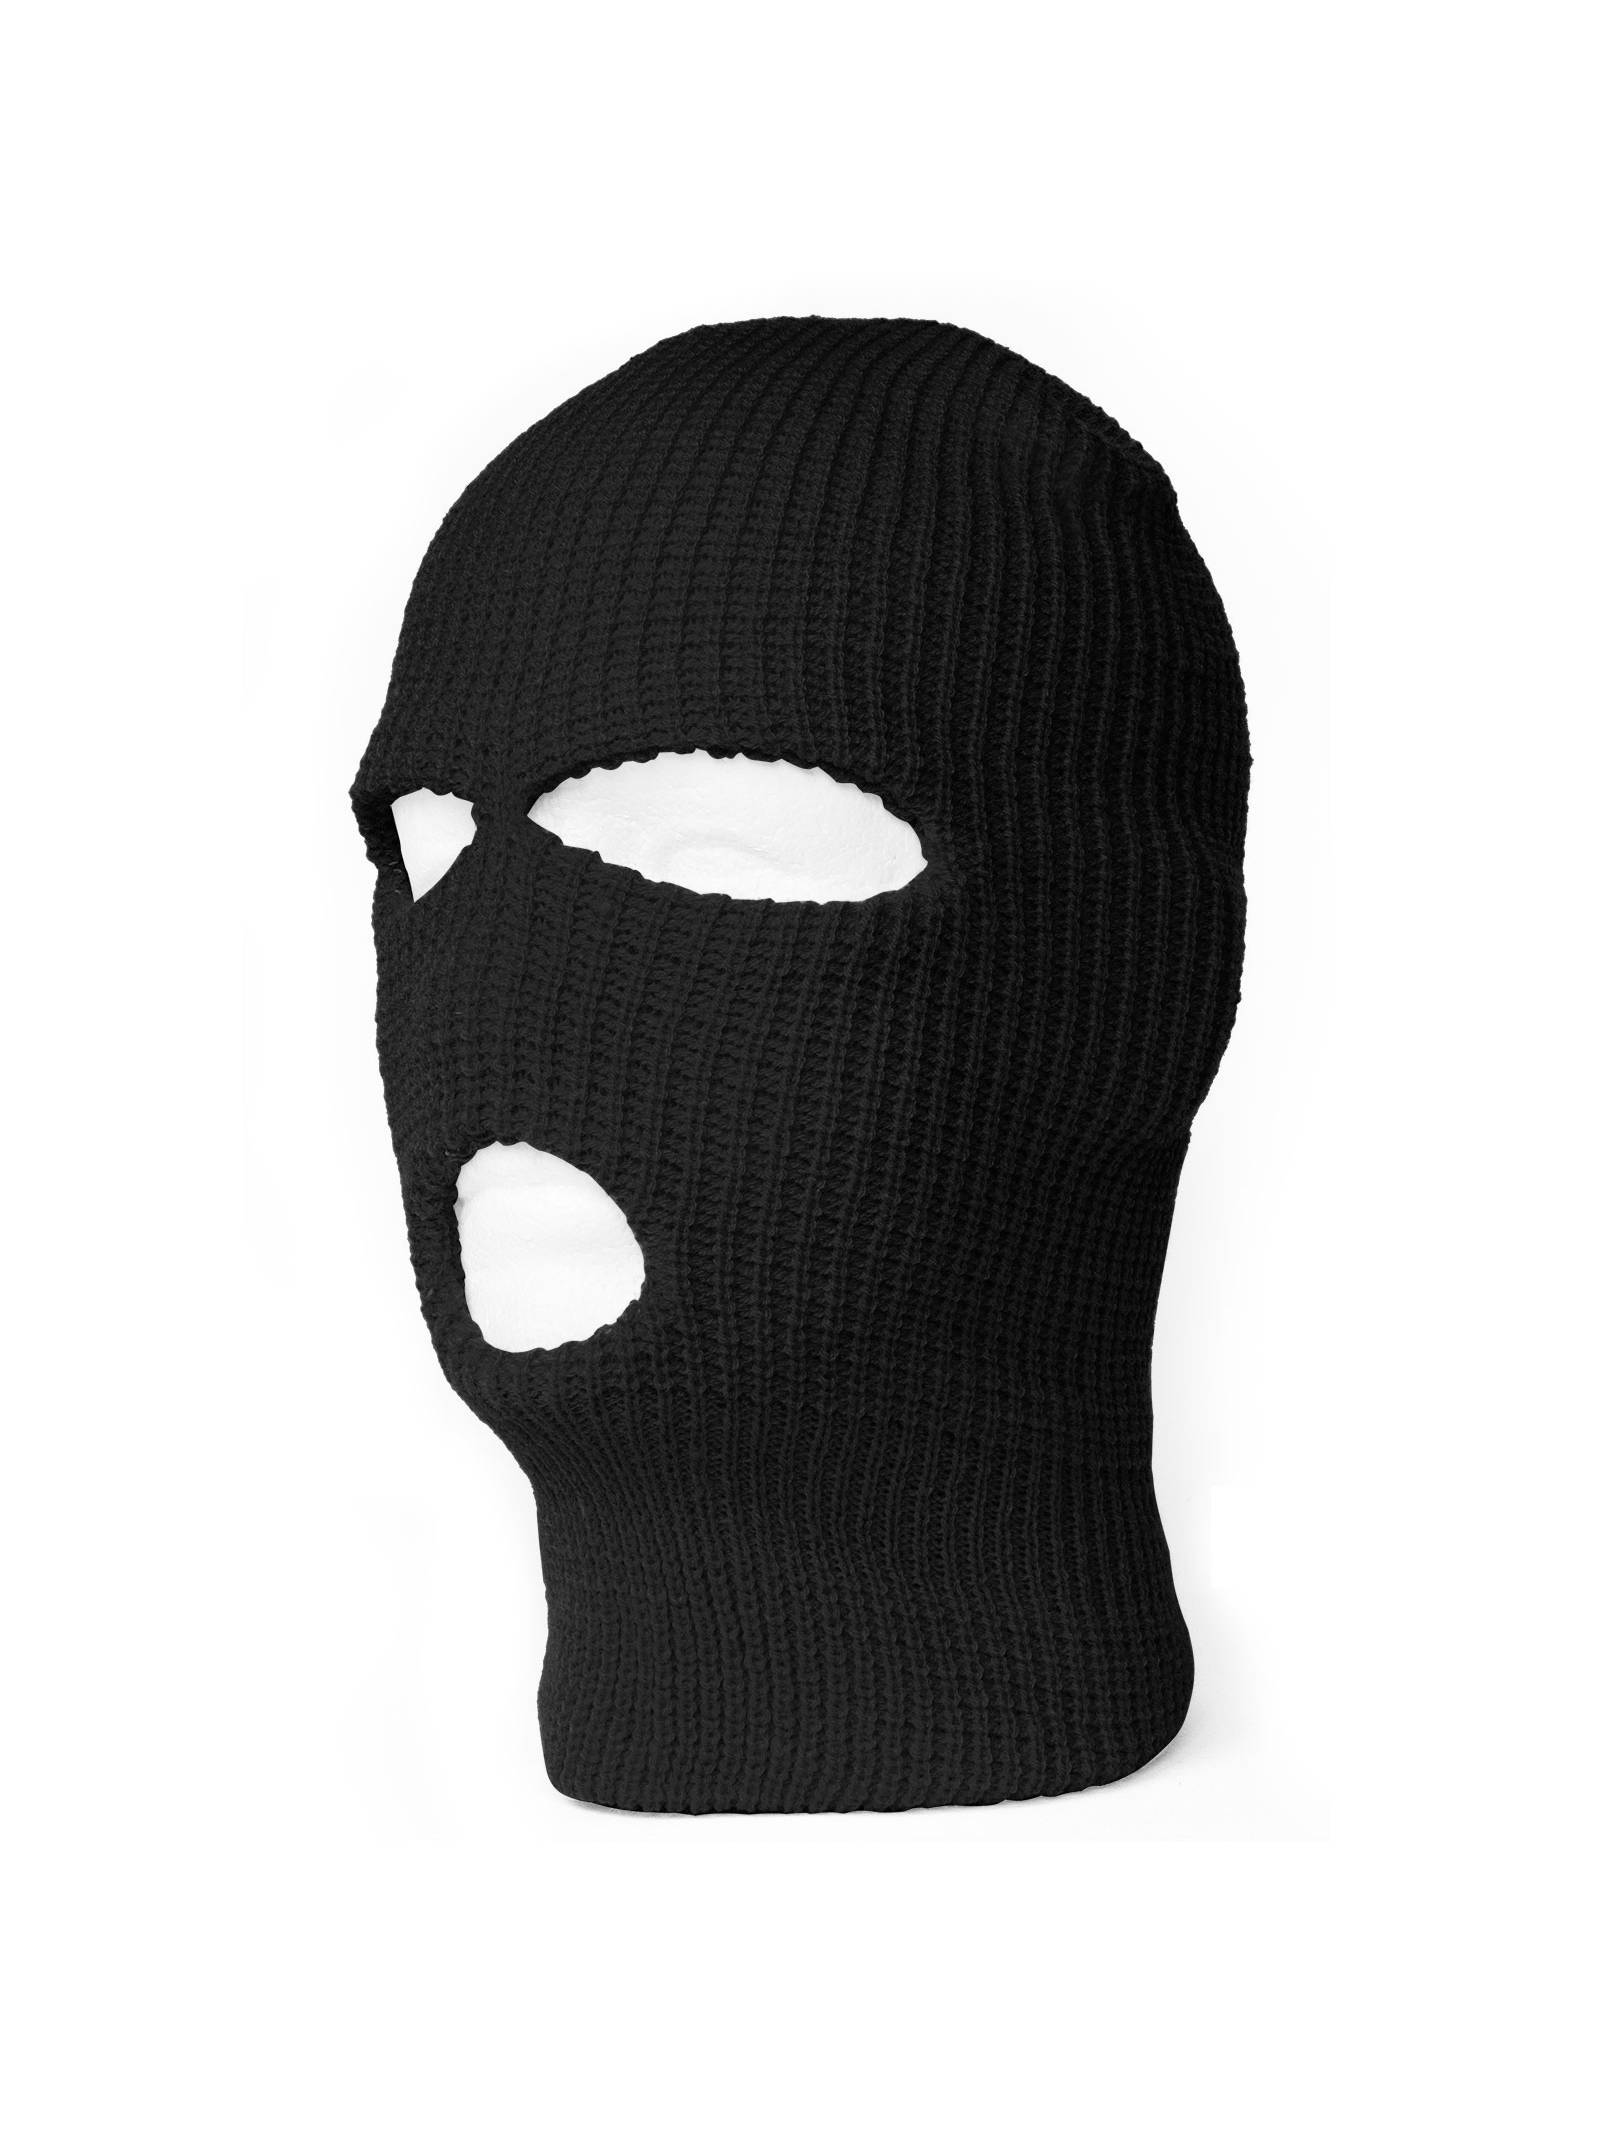 TopHeadwear 3 Hole Winter Ski Sport Face Guards and Masks, Black